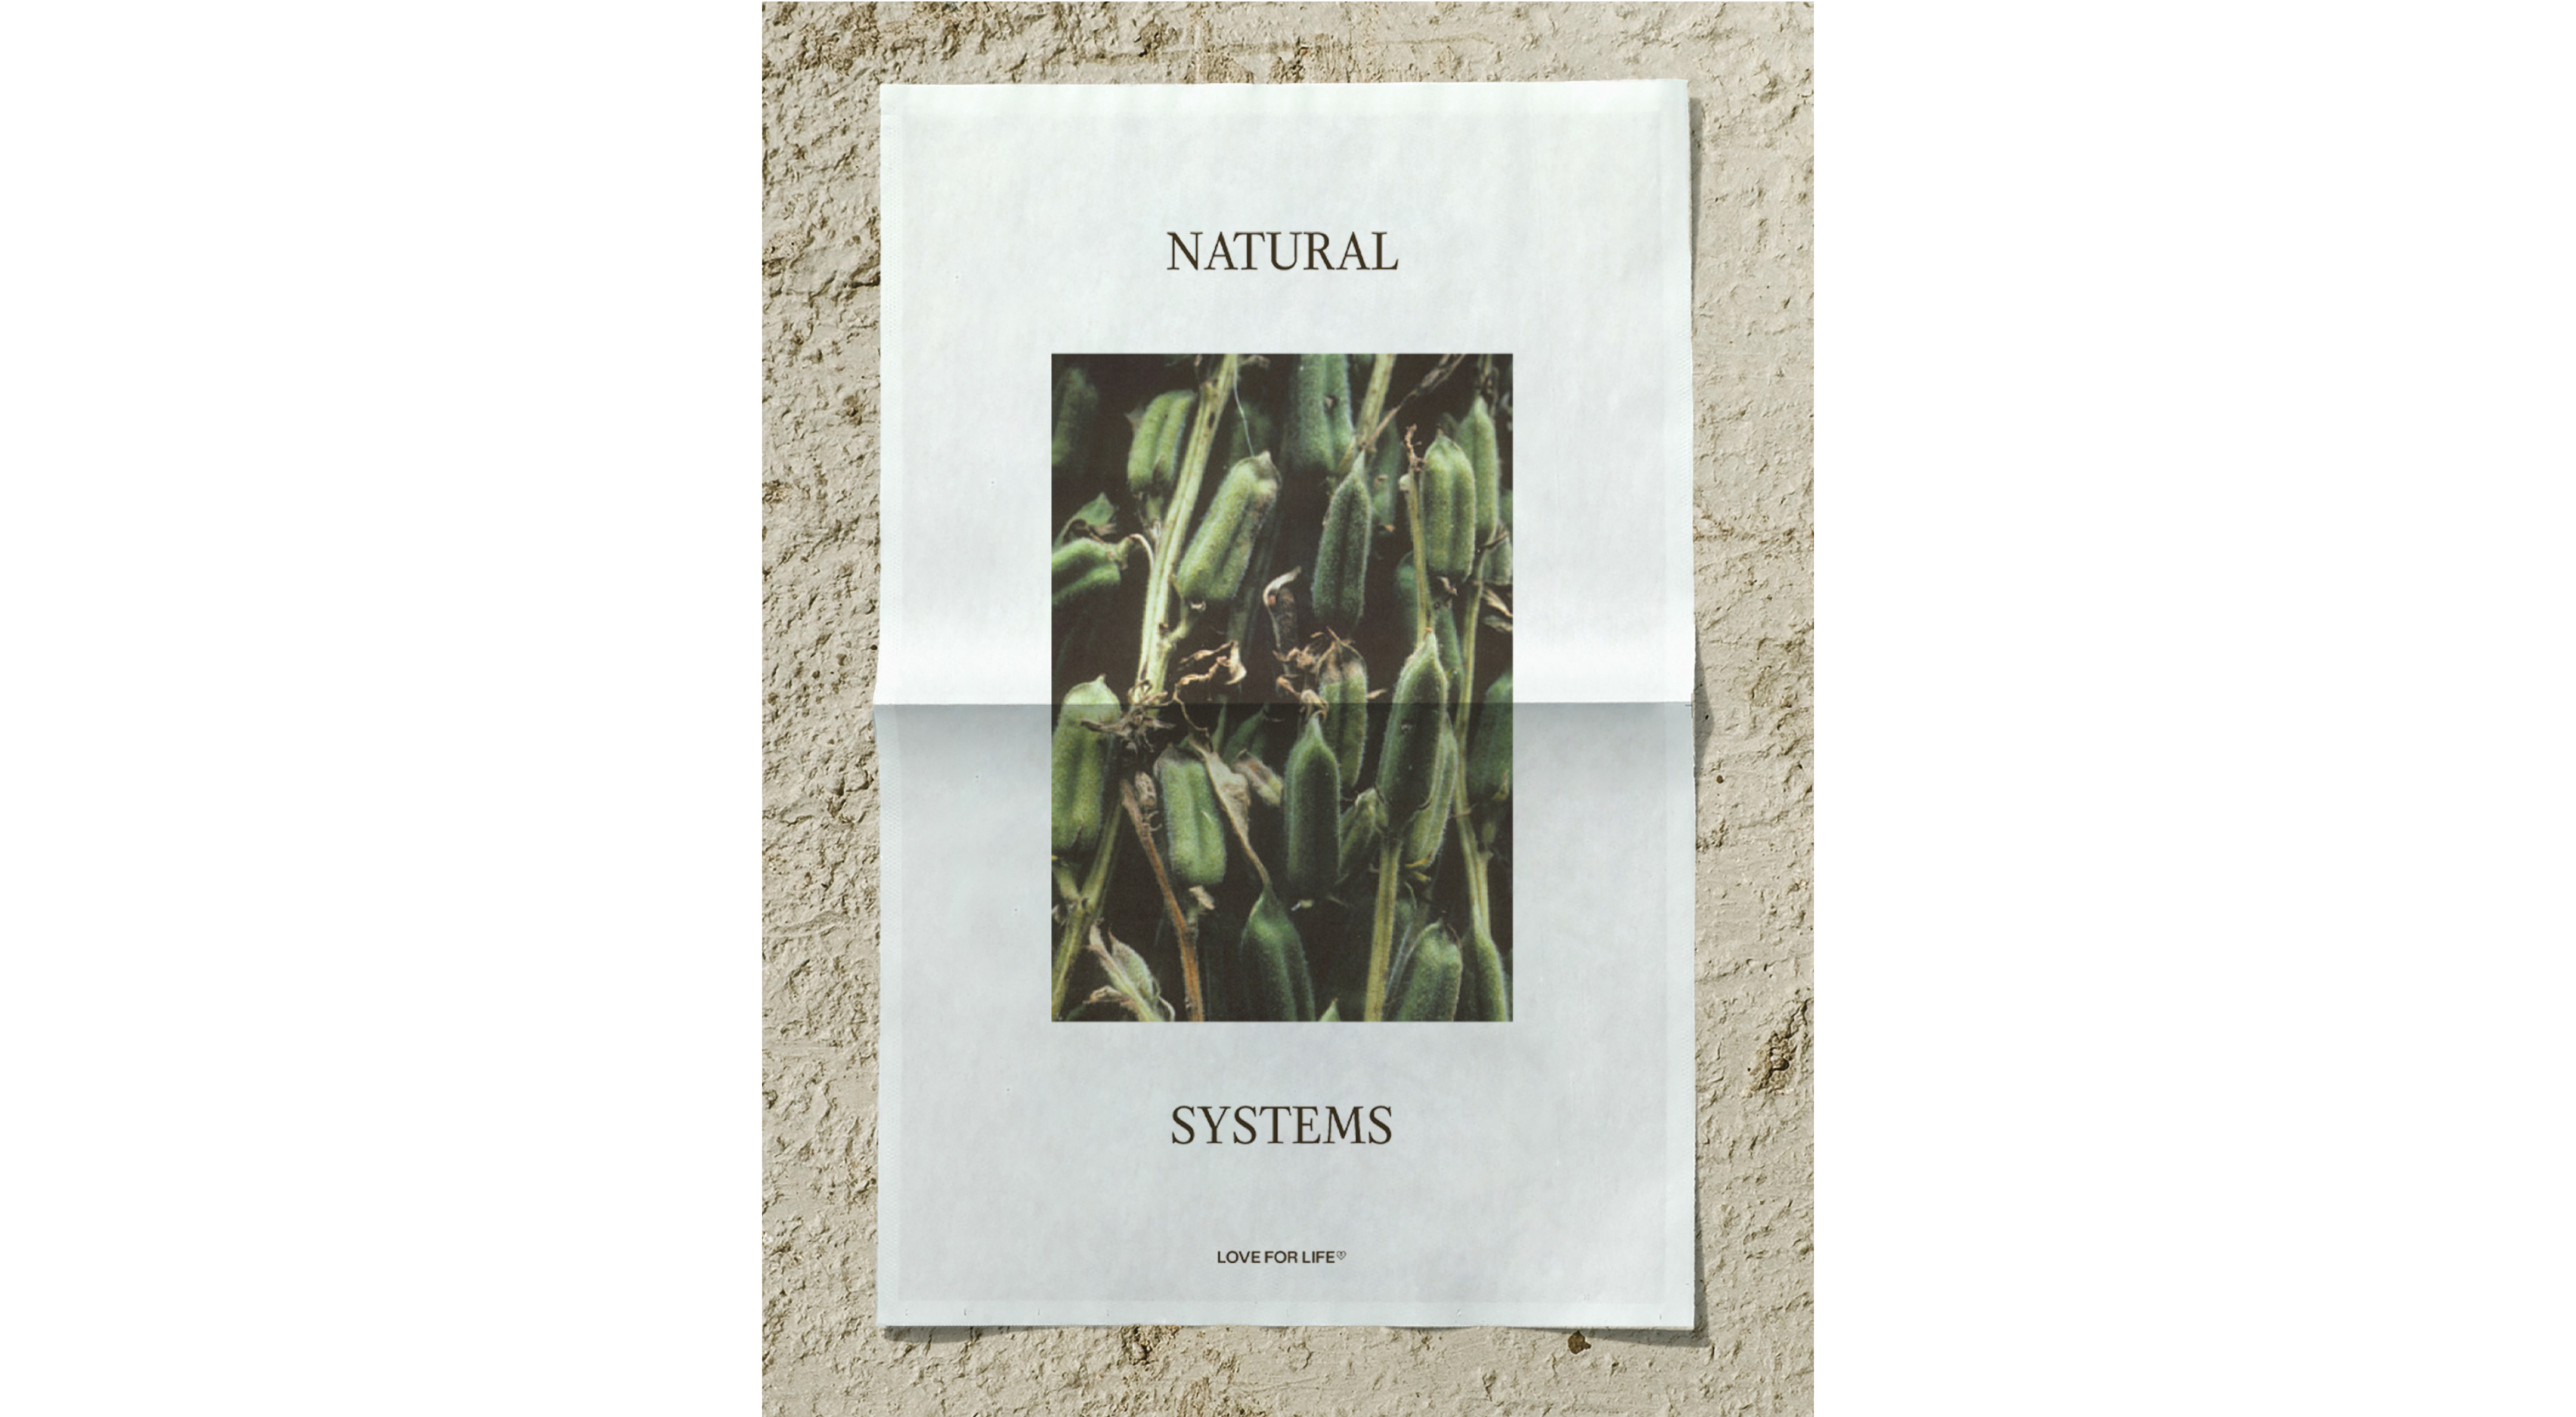 Newsprint image on a stone background with 'Natural Systems' and an image of some plants